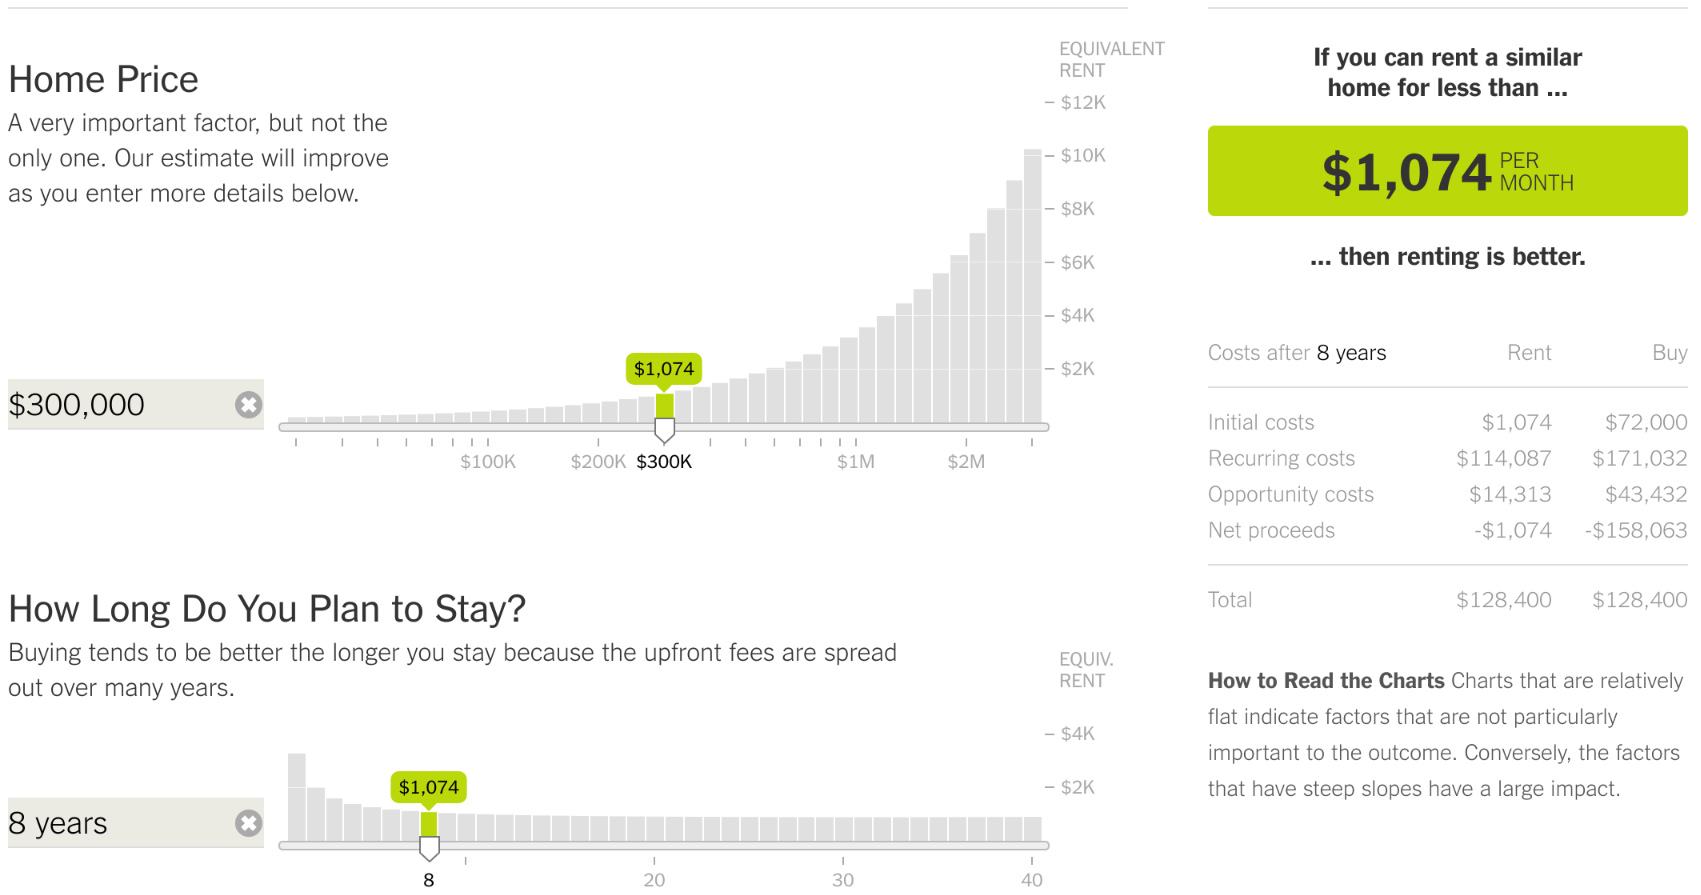 Home Price section of the [*Buy or Rent Calculator*, The New York Times](https://www.nytimes.com/interactive/2014/upshot/buy-rent-calculator.html) by [Mike Bostock](https://bost.ocks.org/mike/).